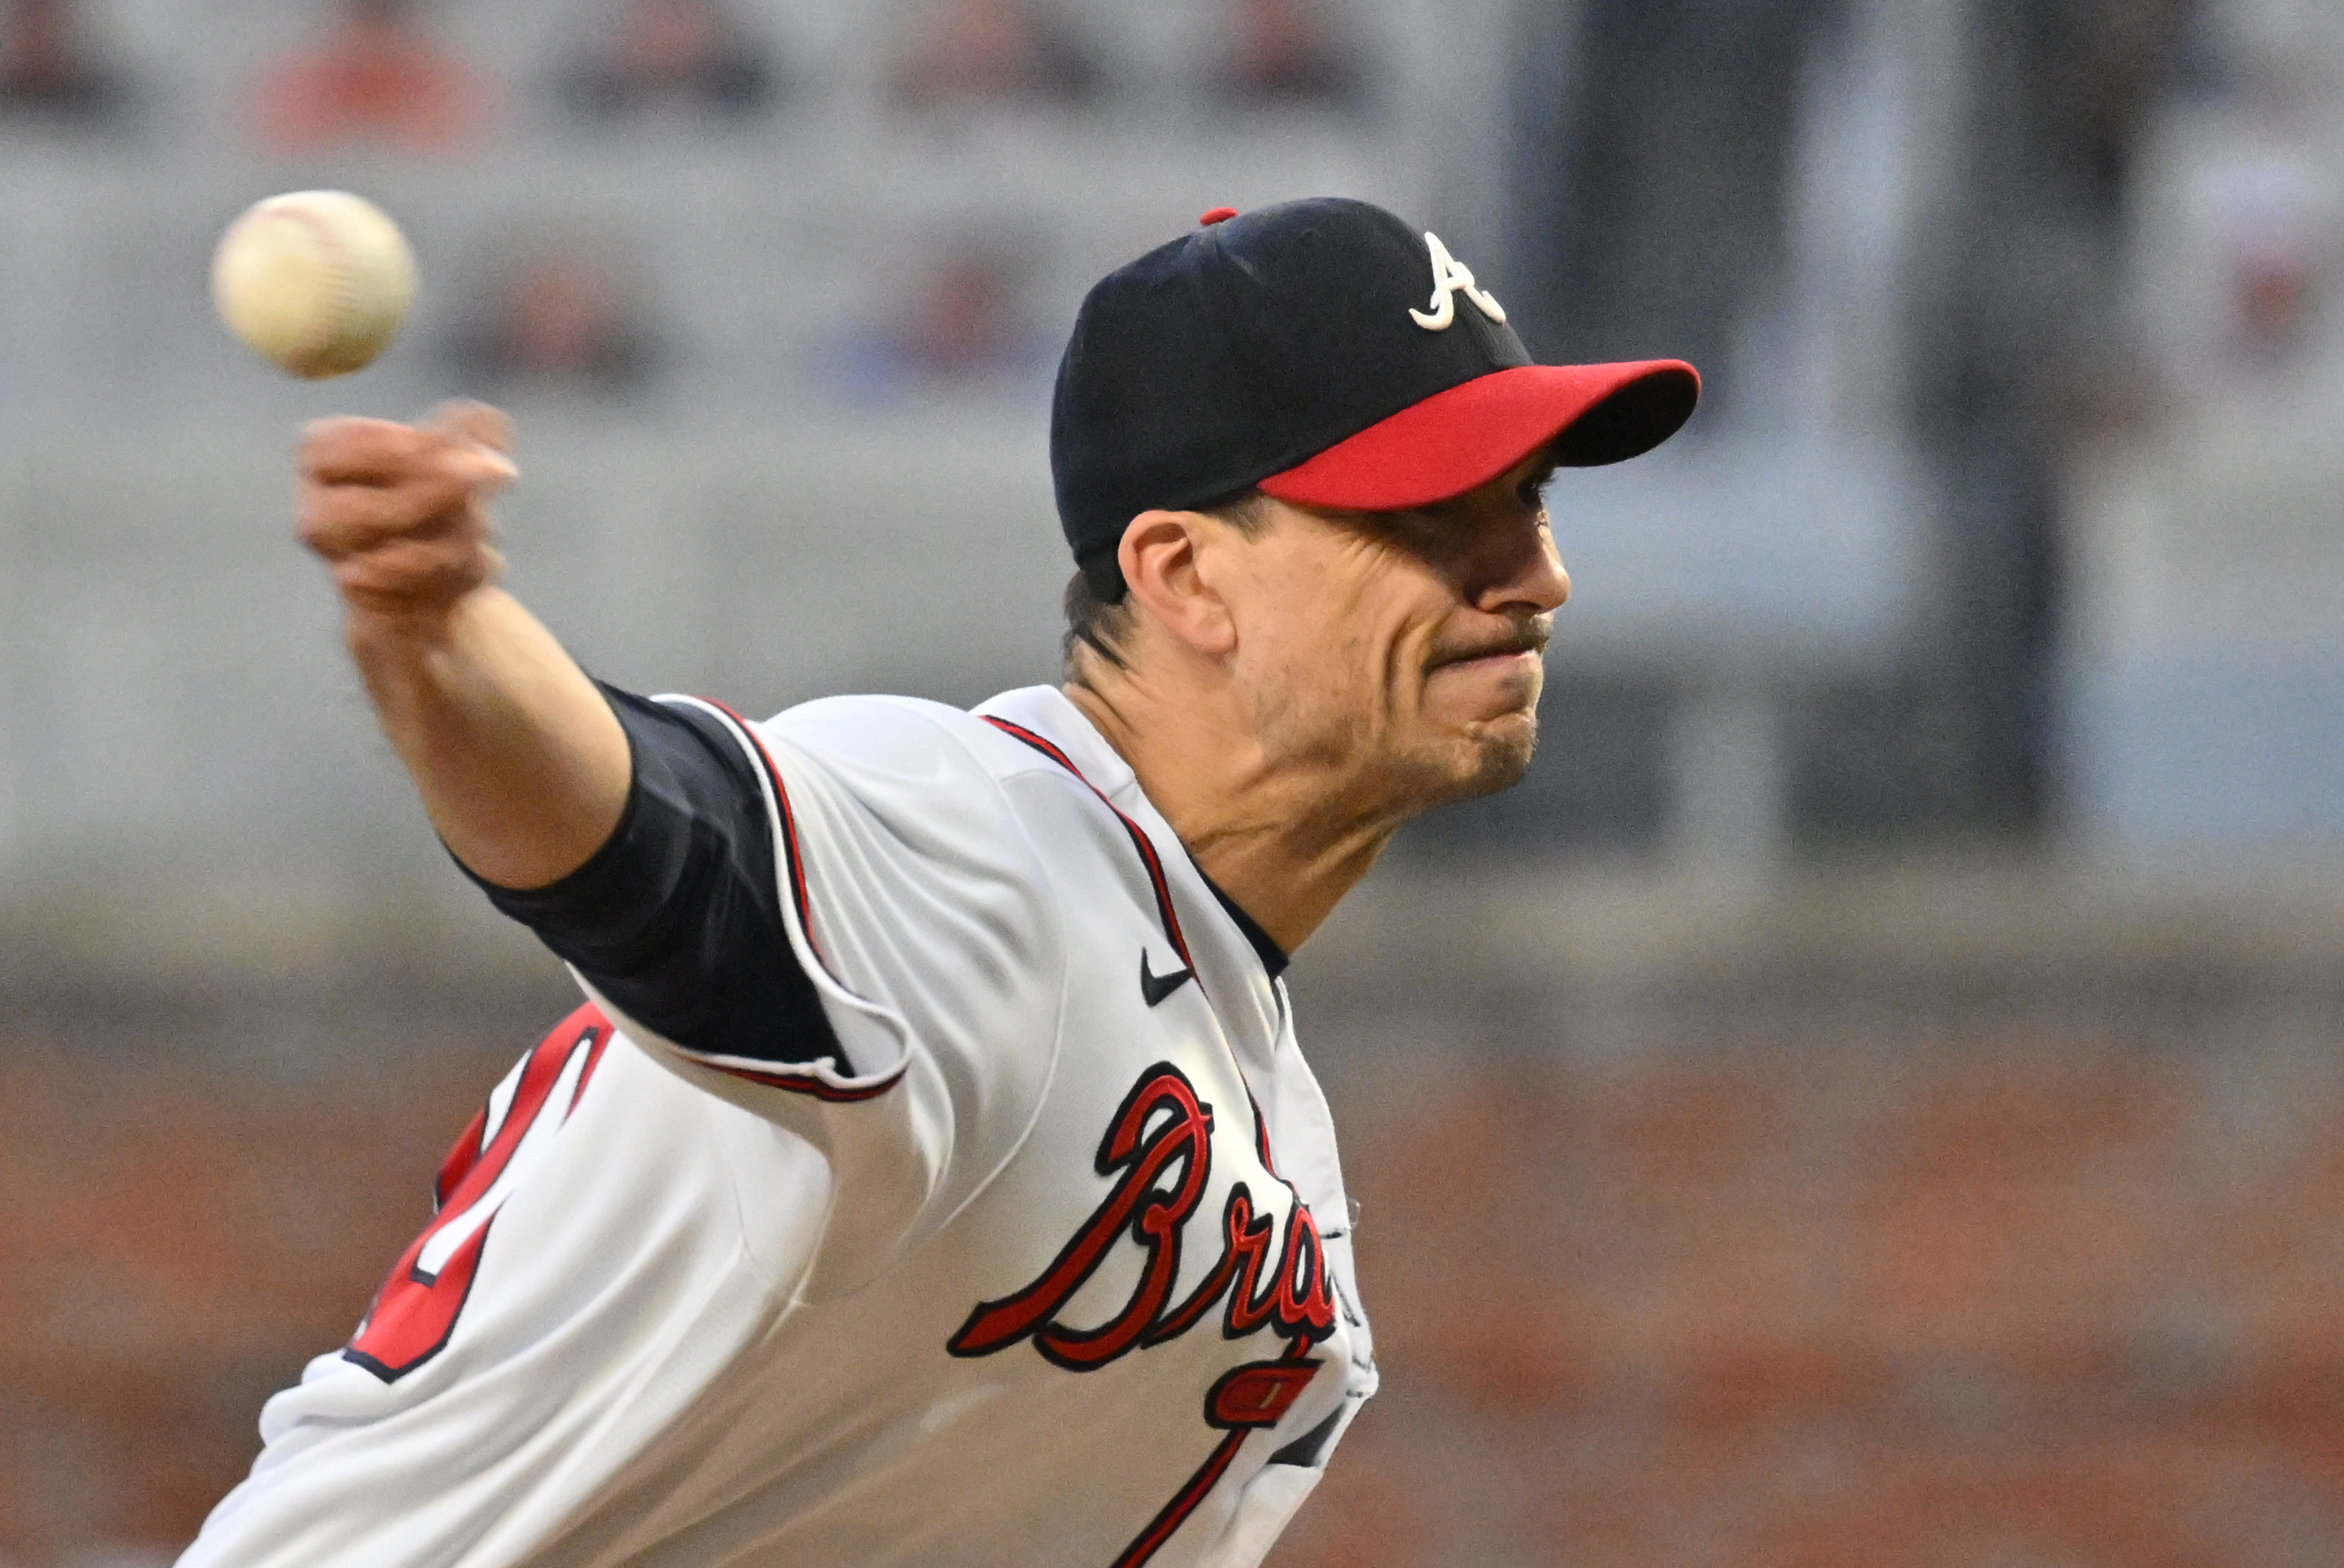 Charlie Morton injury update: Braves pitcher lands on IL with